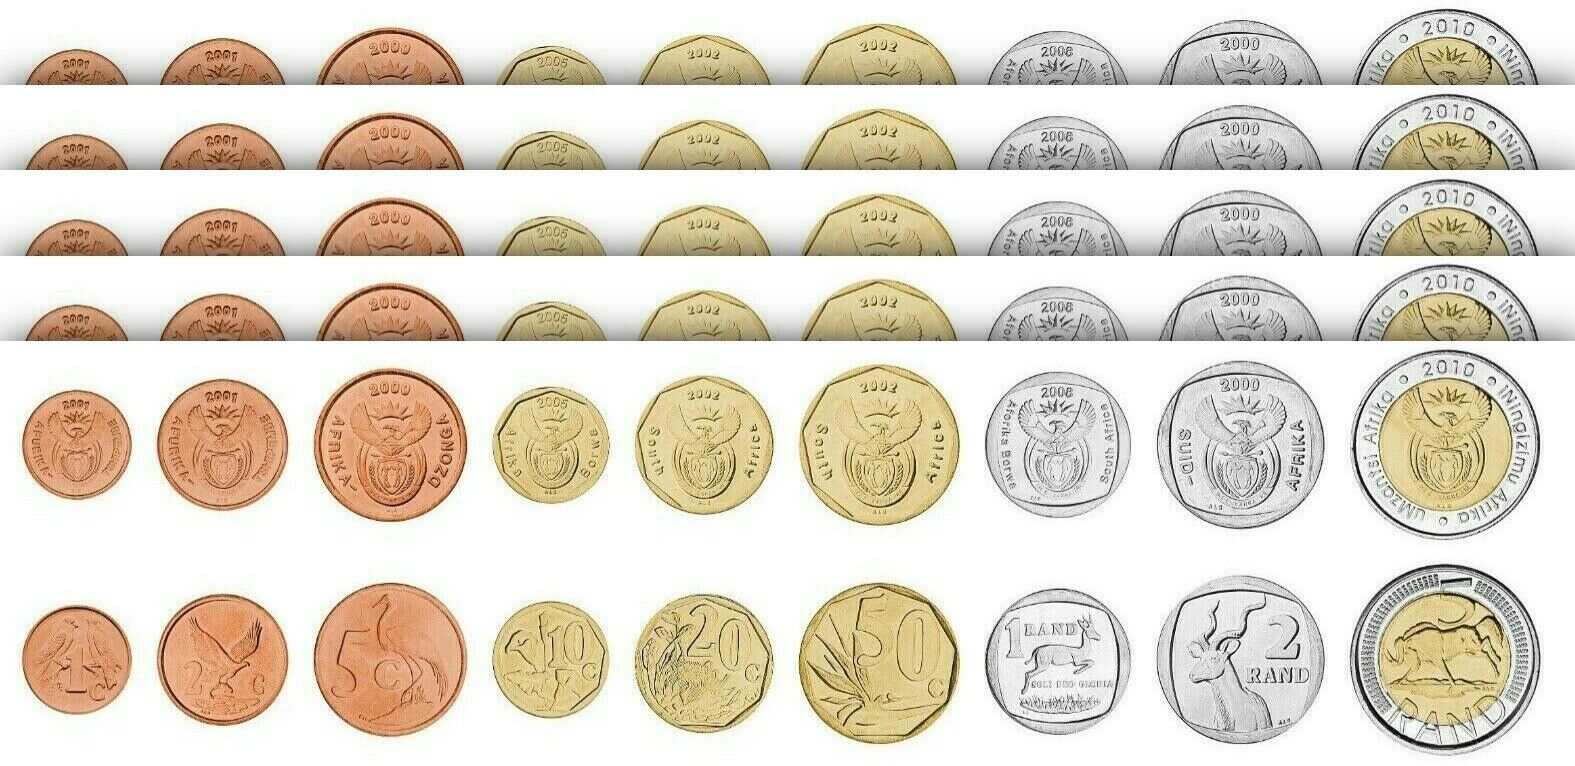 1 2 euro UNC Luxembourg 2006 set of 8 euro coins 1 2 5 10 20 50 cent 